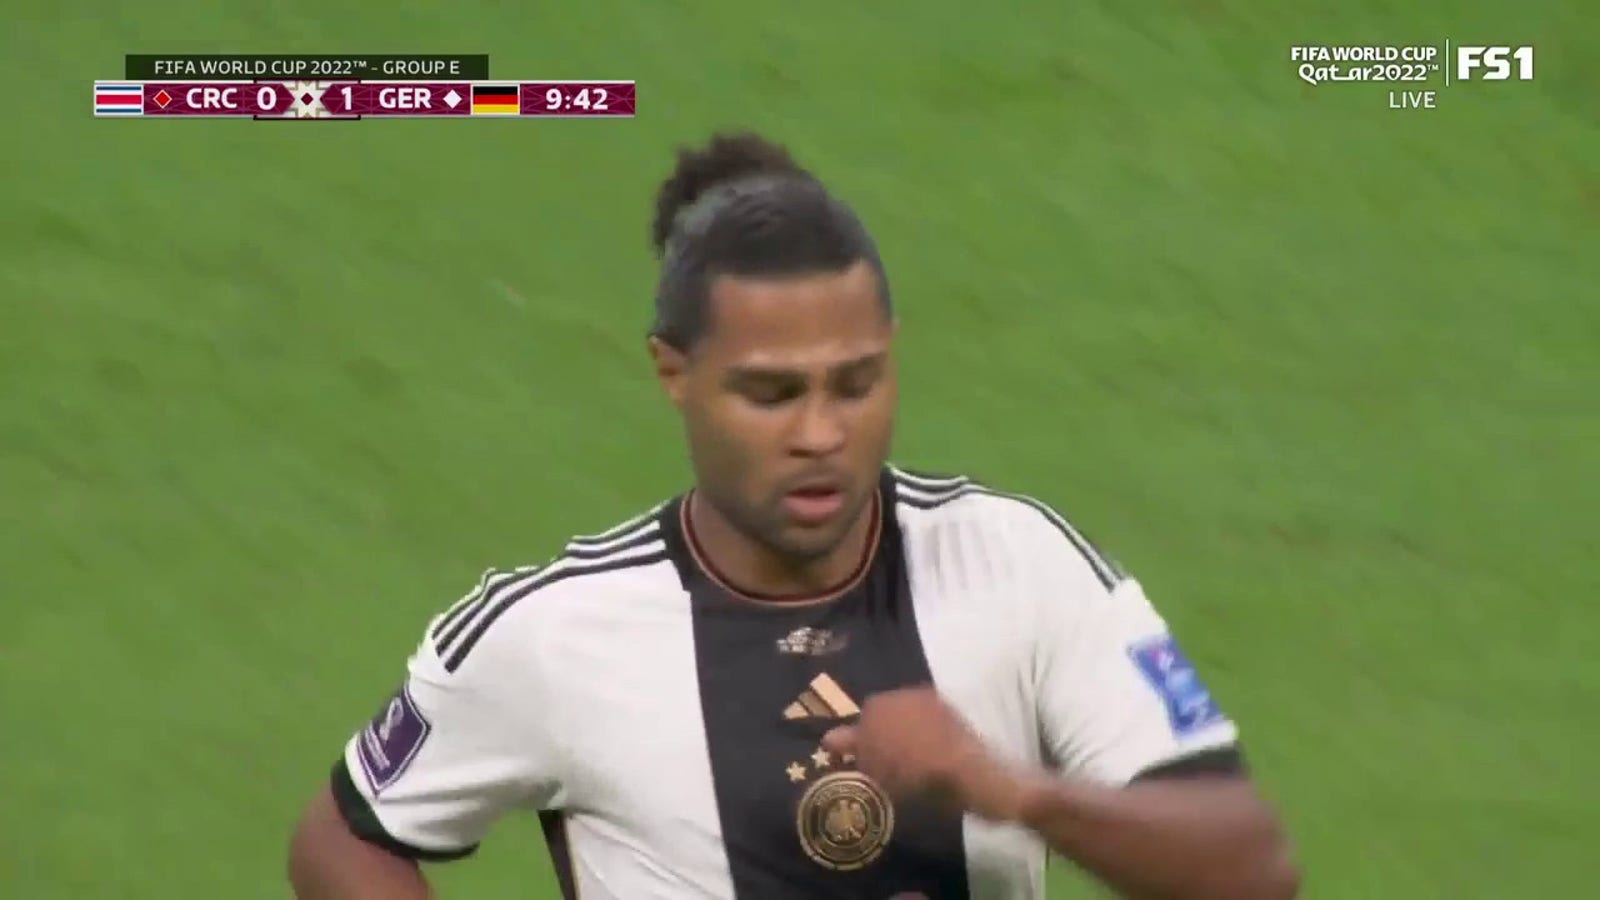 Serge Gnabry of Germany scores a goal against Costa Rica in 10 minutes